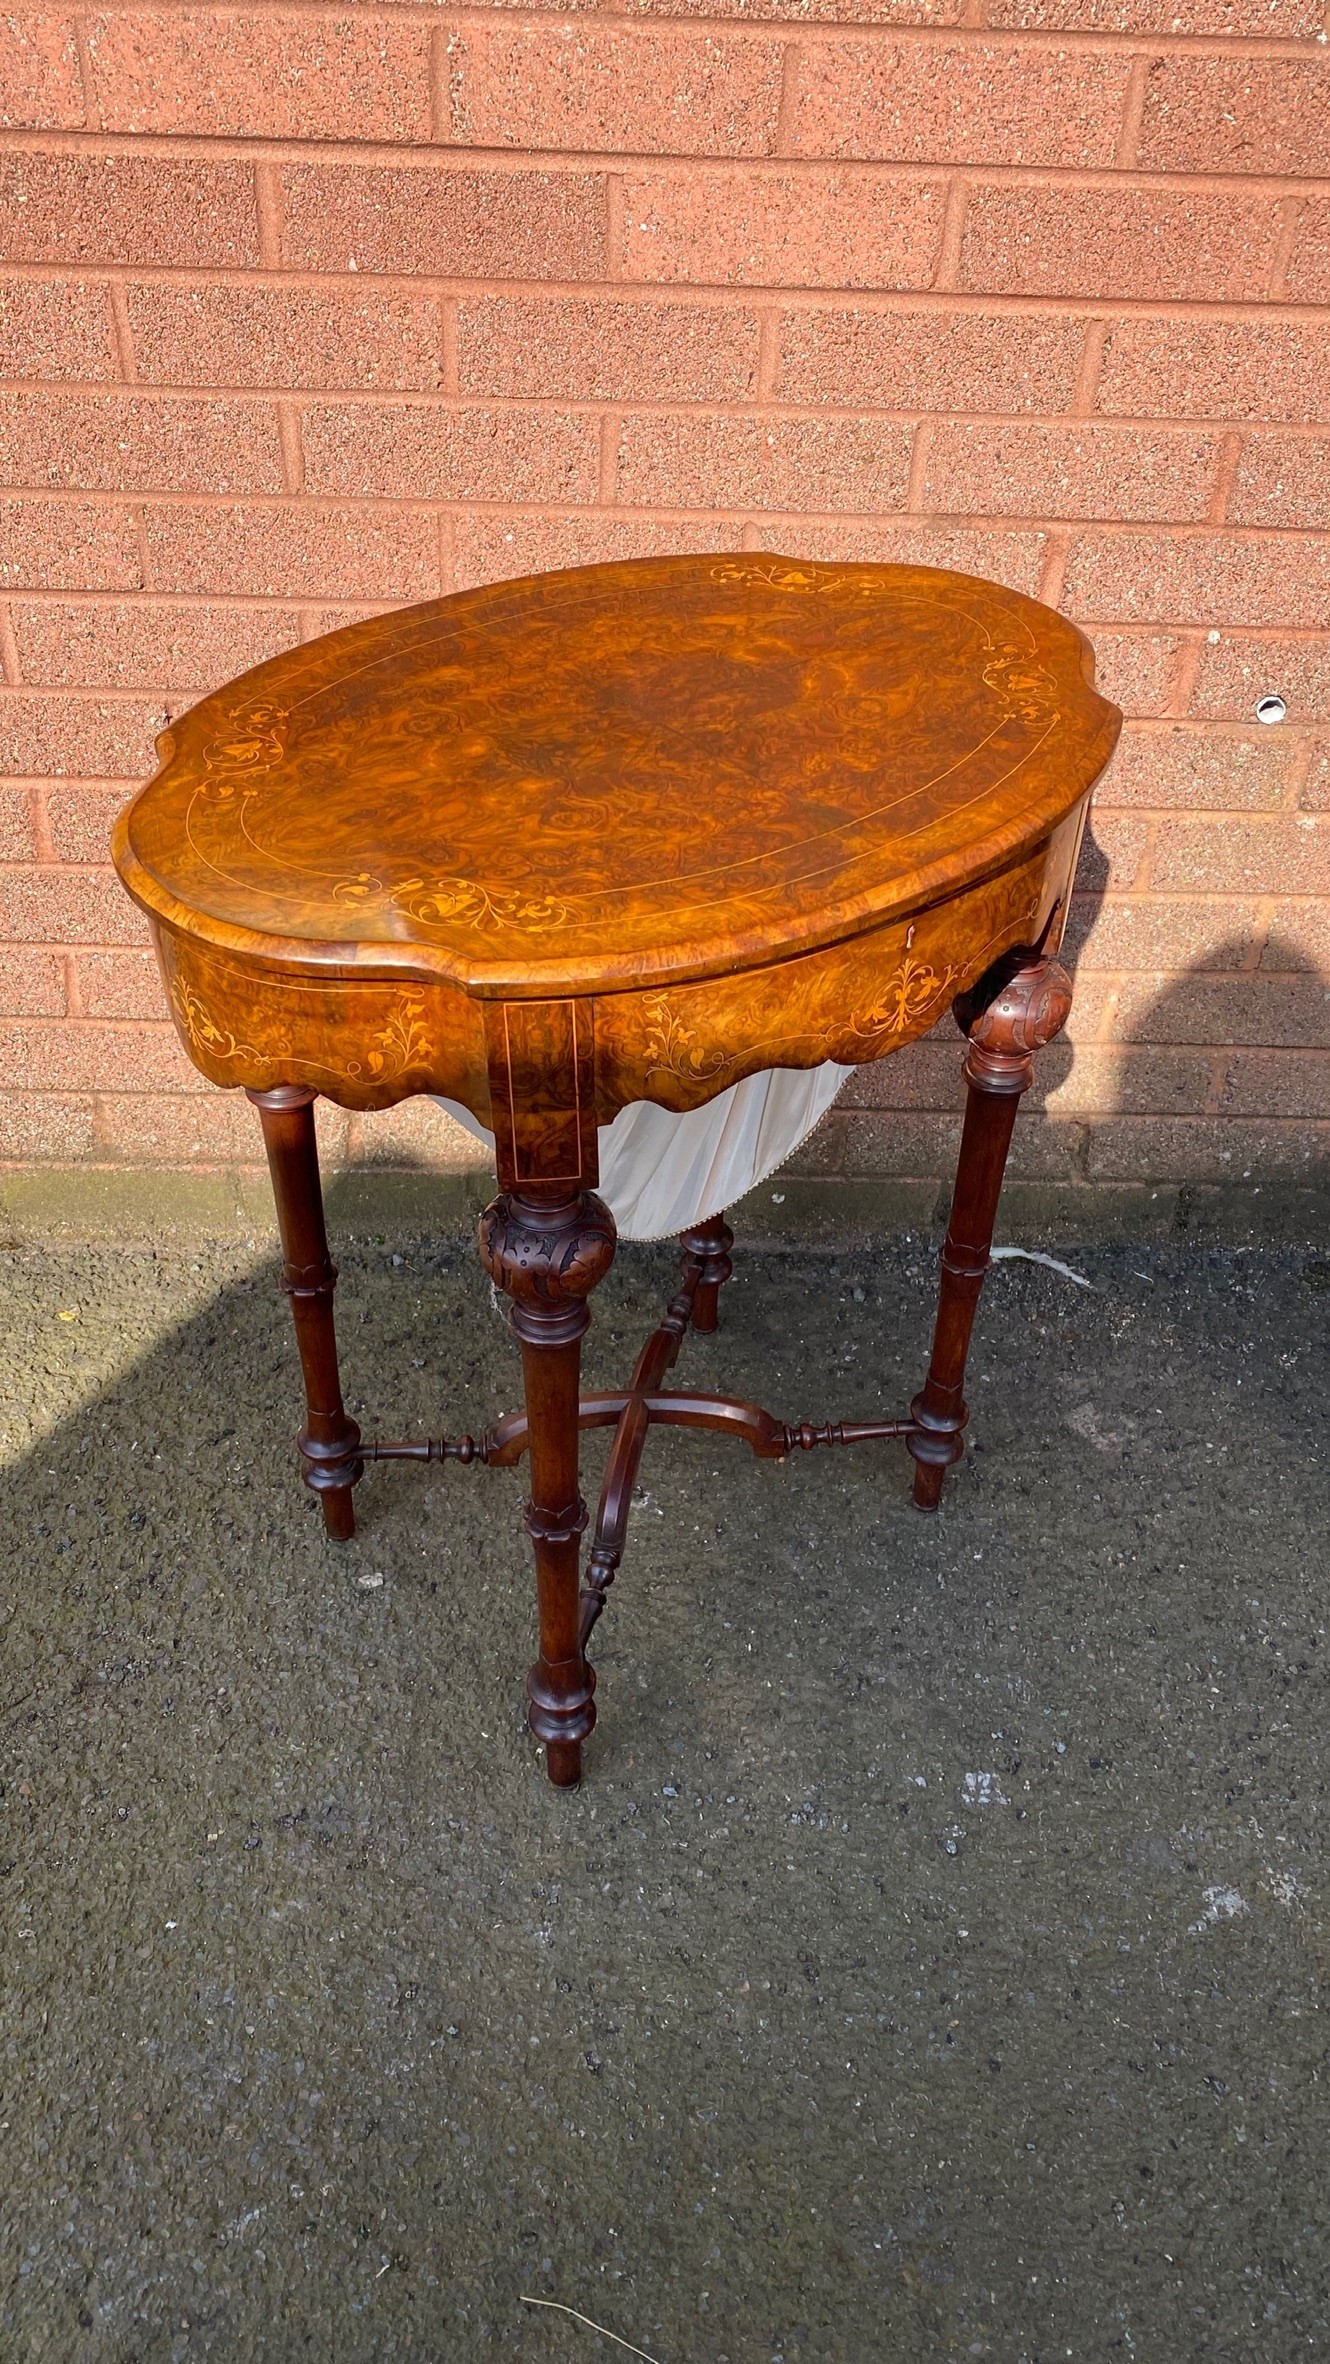 a mid 19th c walnut boxwood inlaid work table by robert strahan of dublin